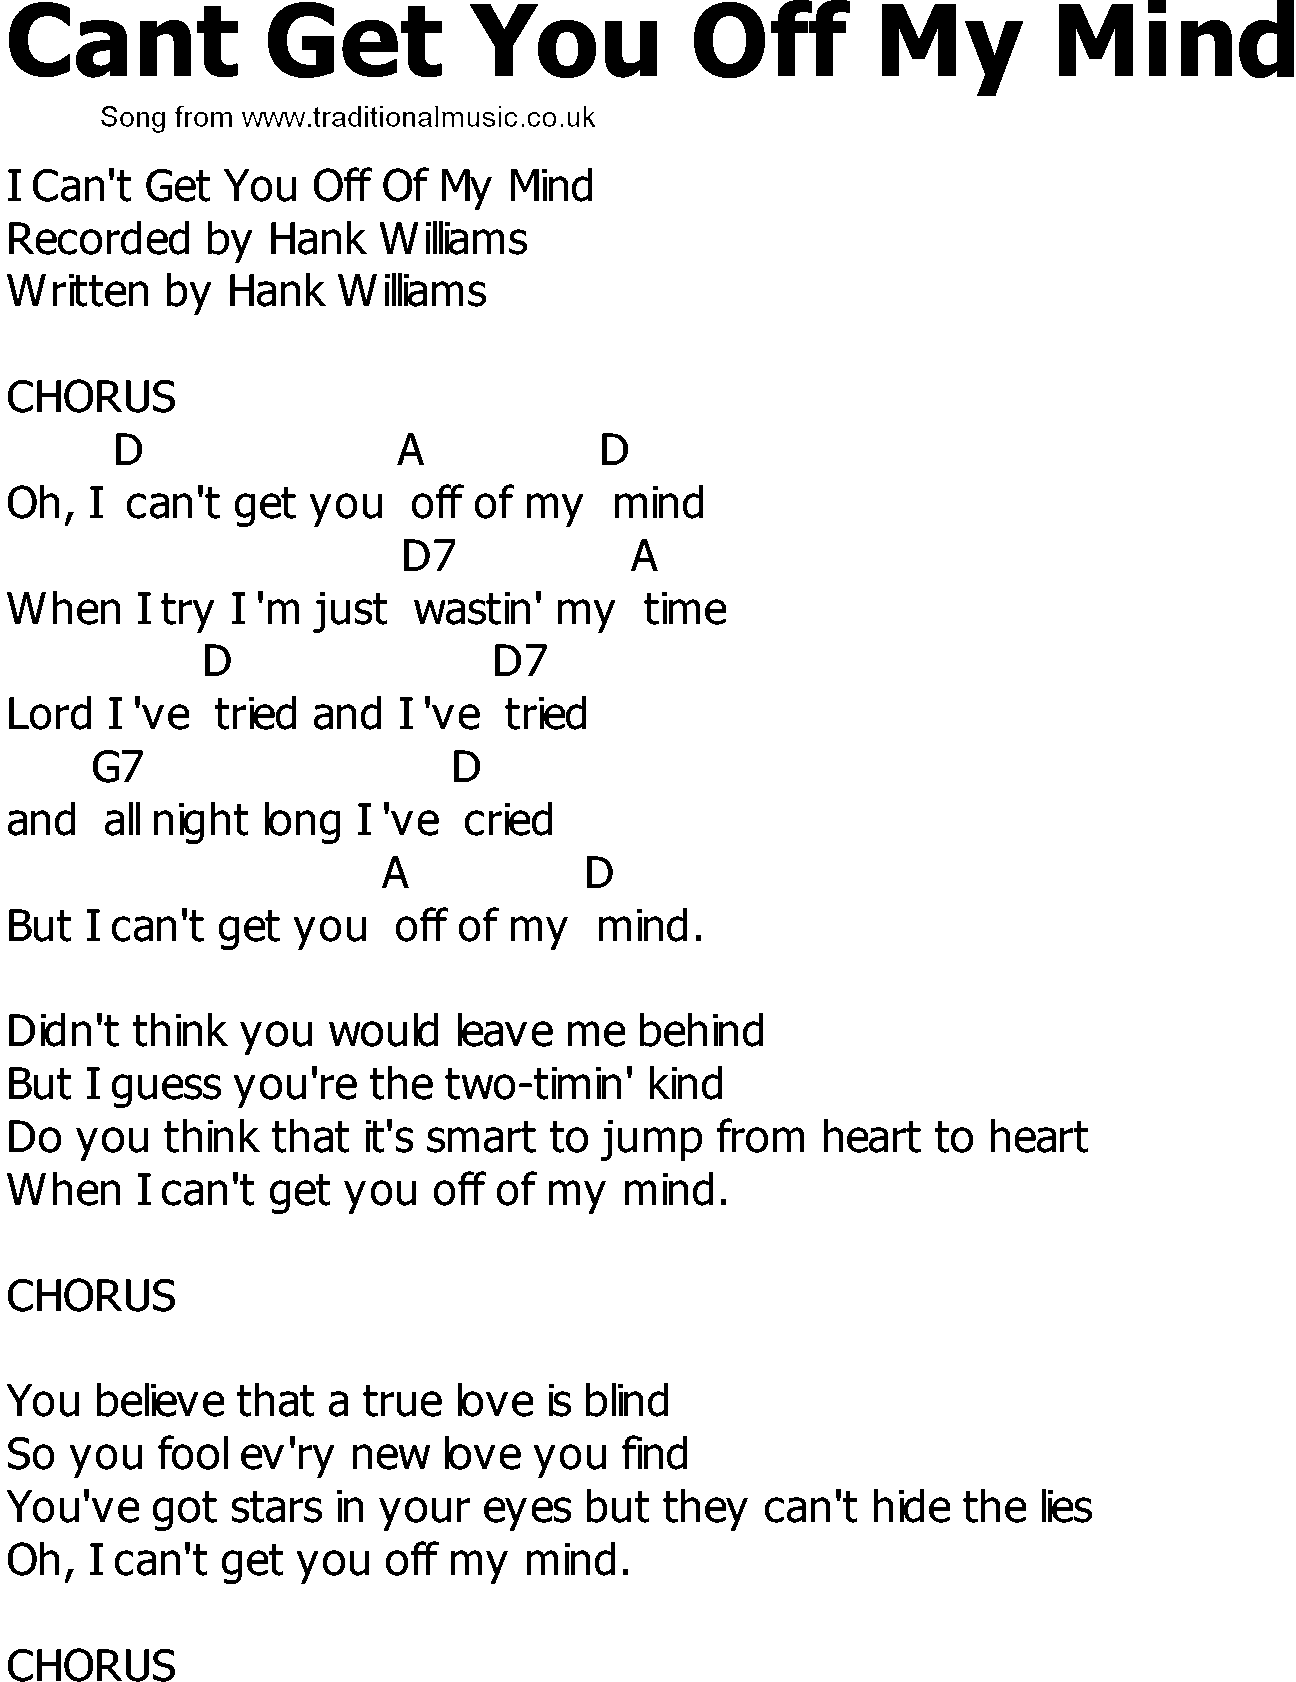 Old Country song lyrics with chords - Cant Get You Off My Mind